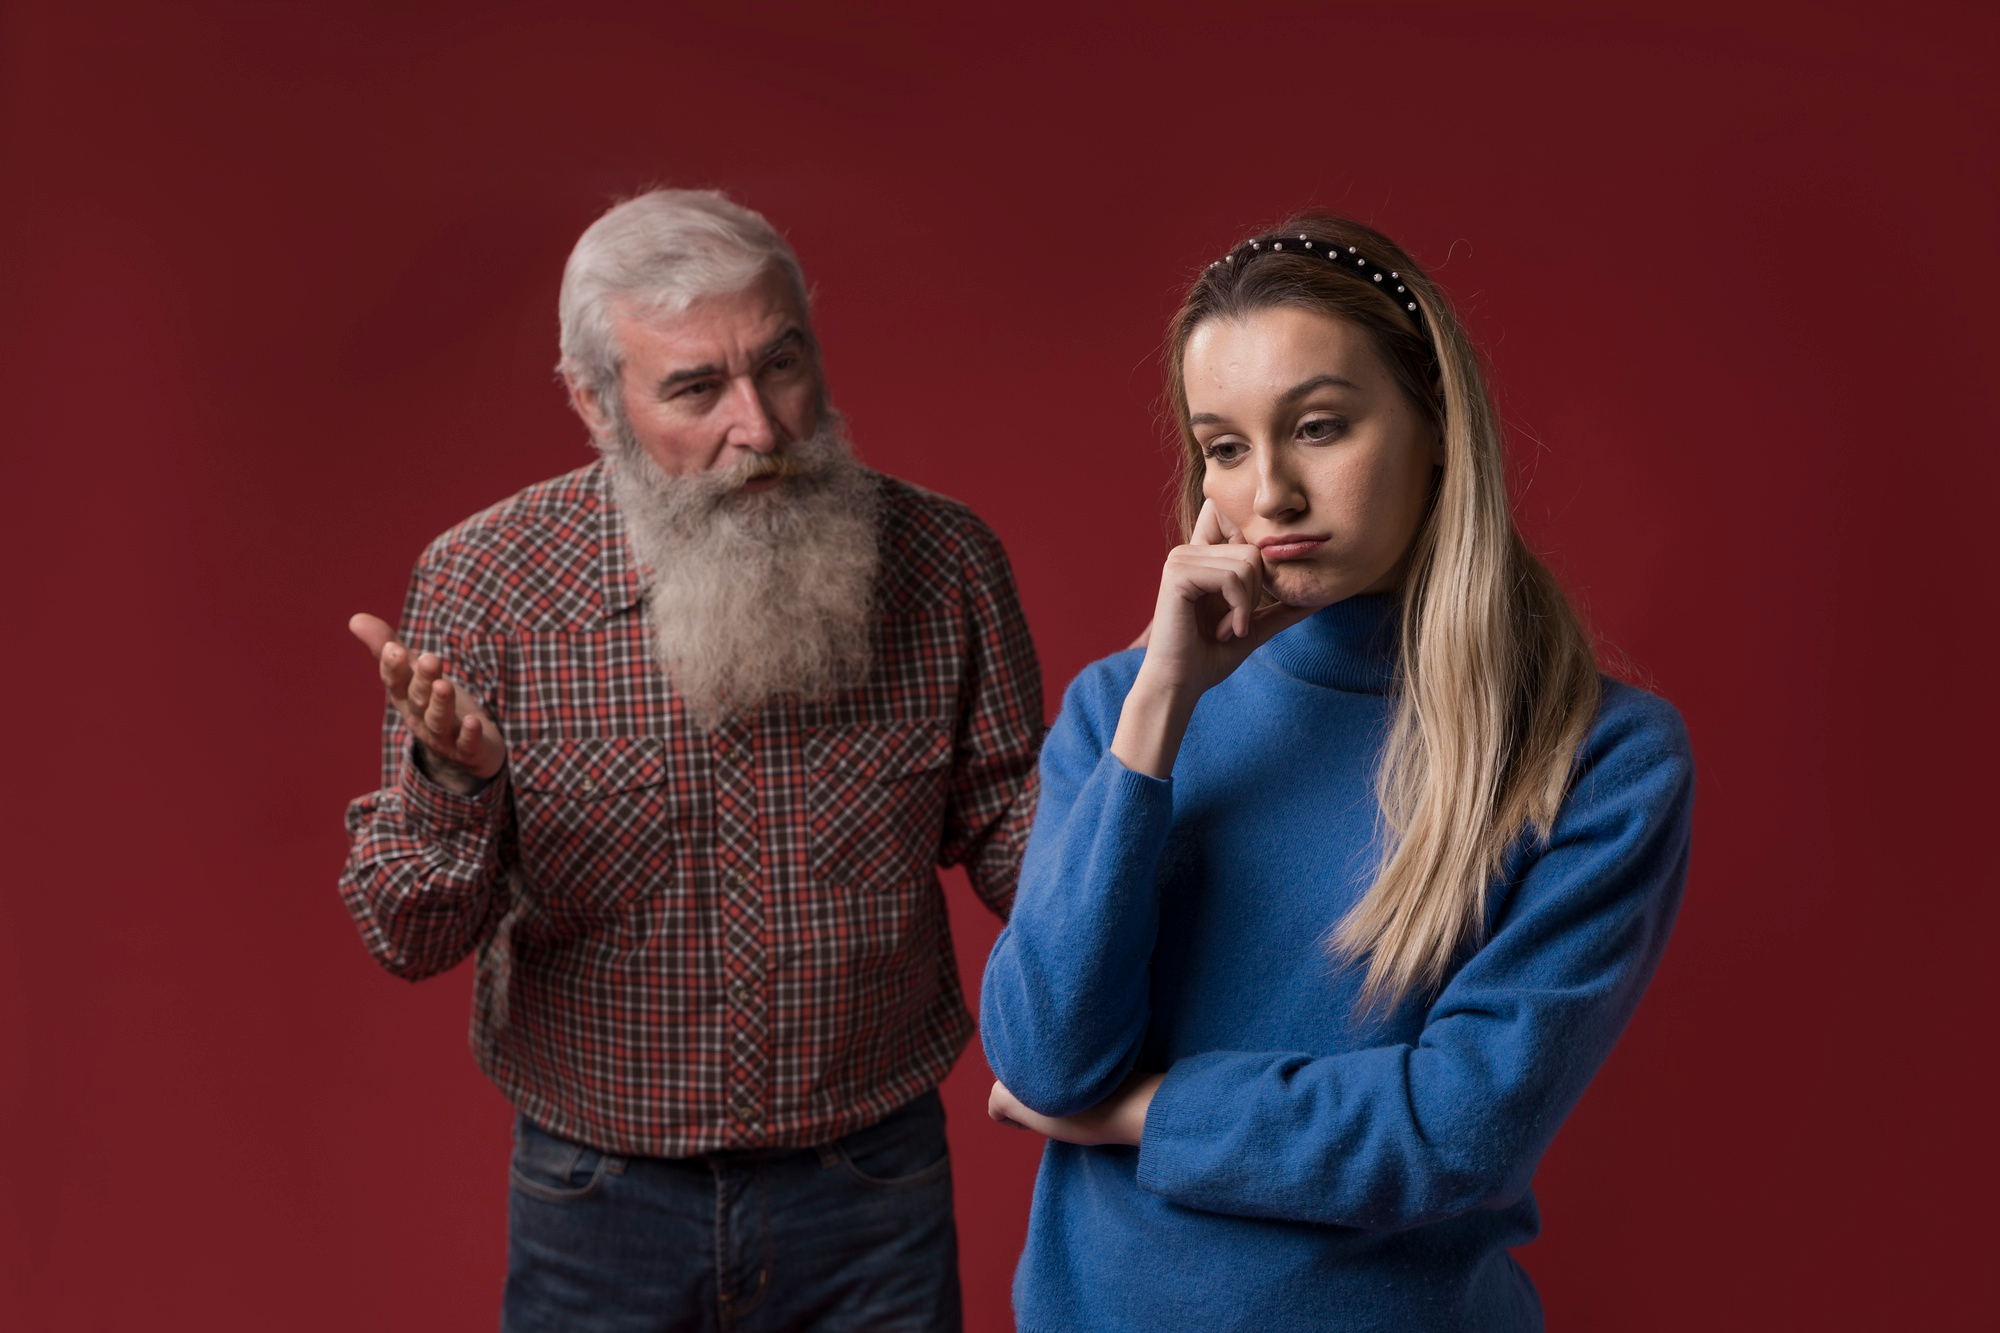 An adult daughter uninterested in what her father has to say | Source: Freepik